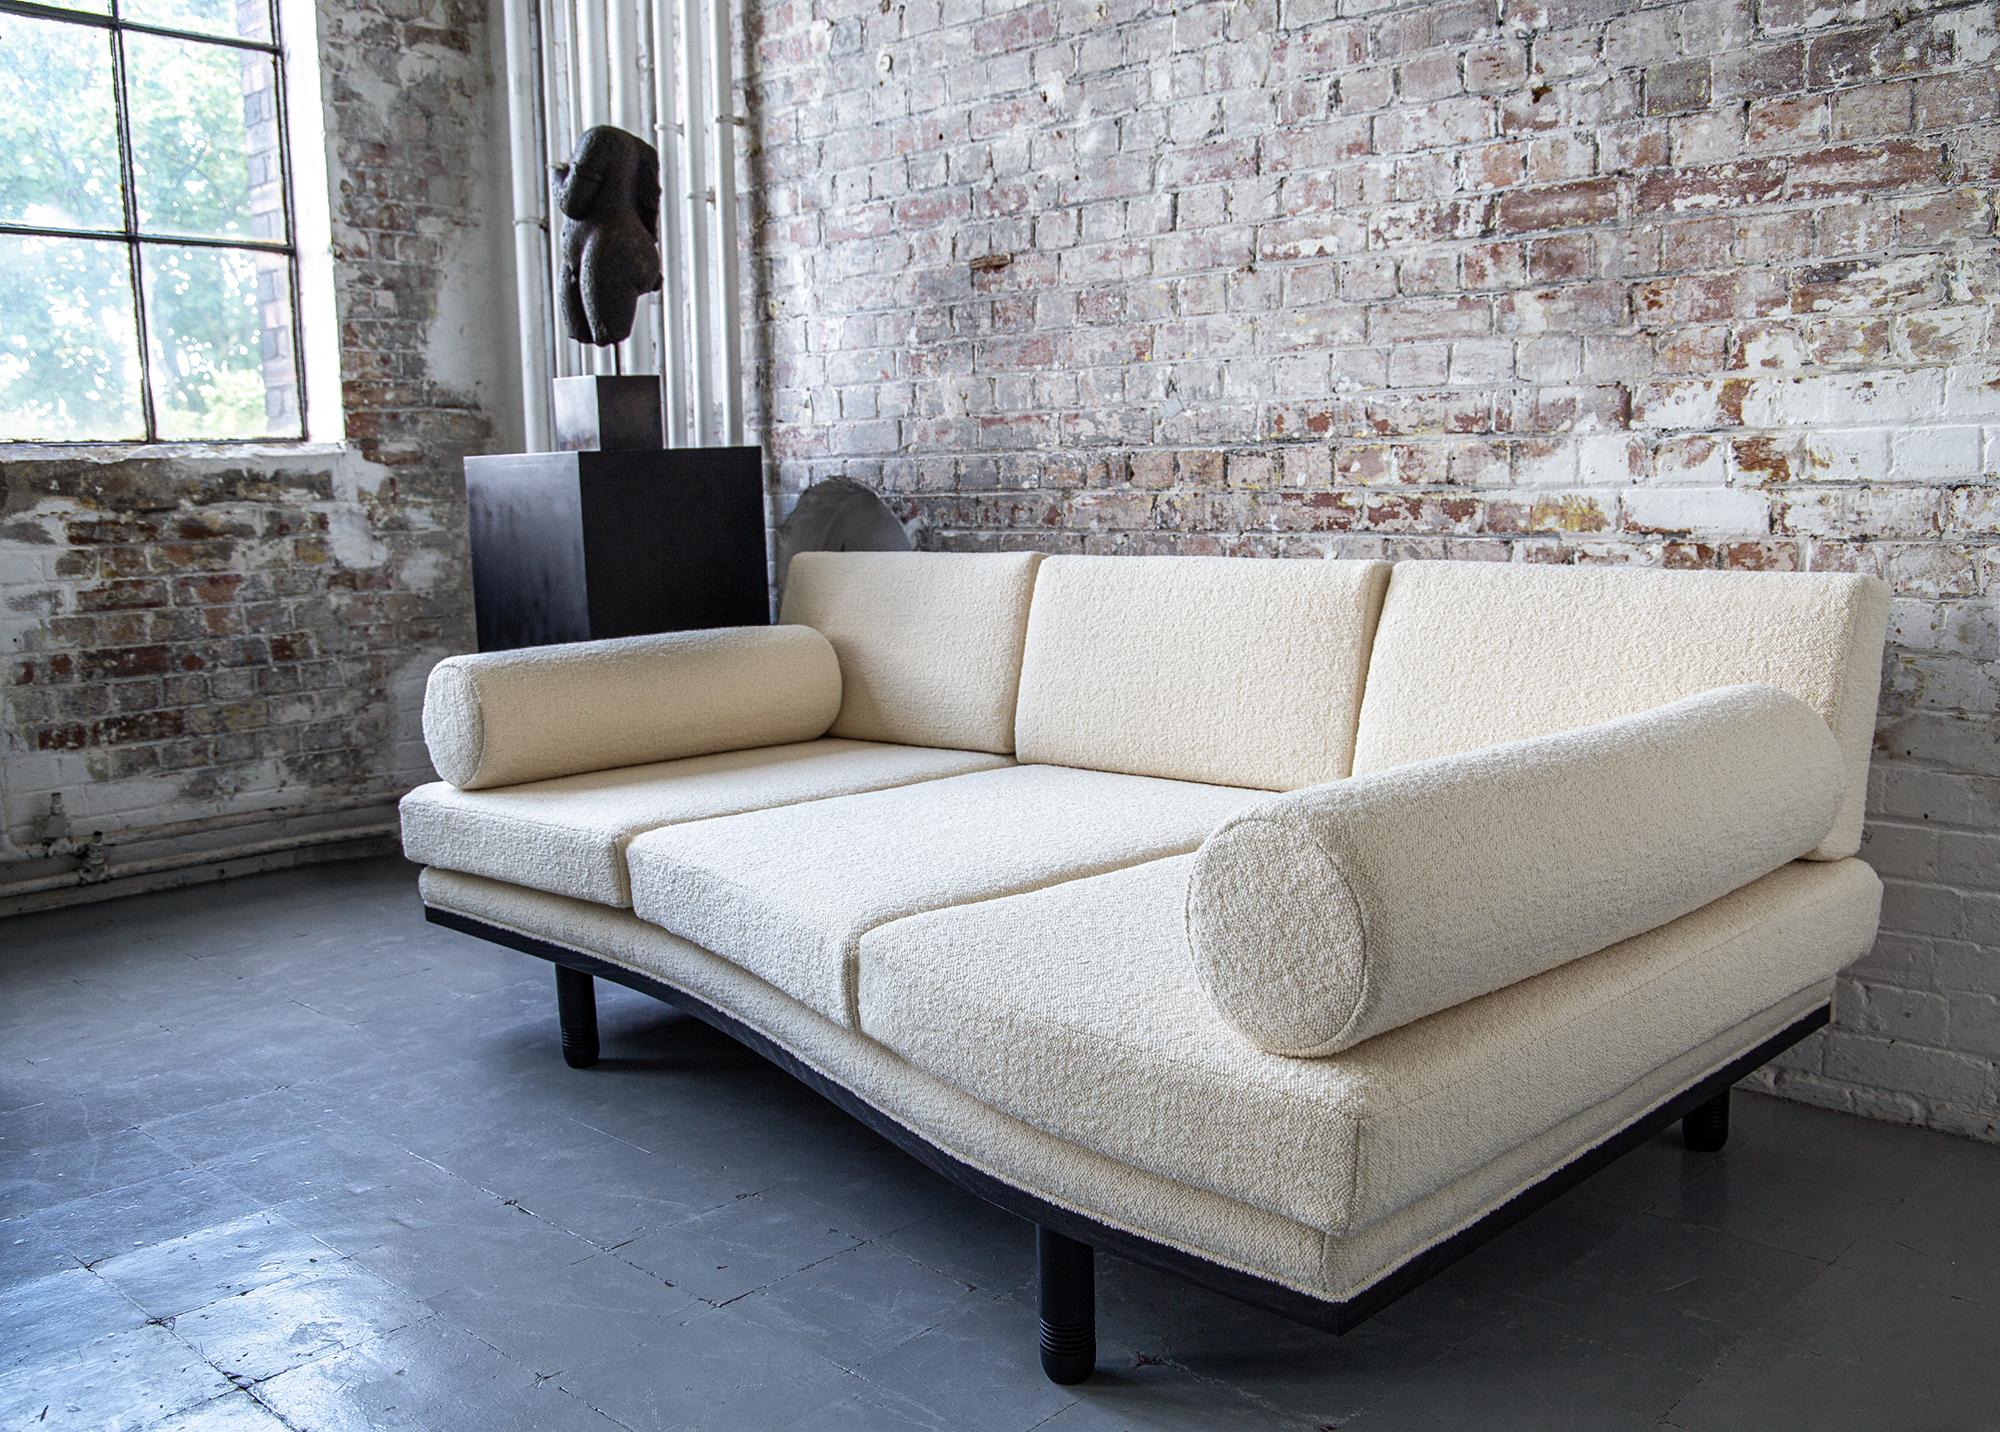 Baalbek, Trapezoidal Sofa Daybed by Toad Gallery, Contemporary Edition 2022 In New Condition For Sale In London, GB